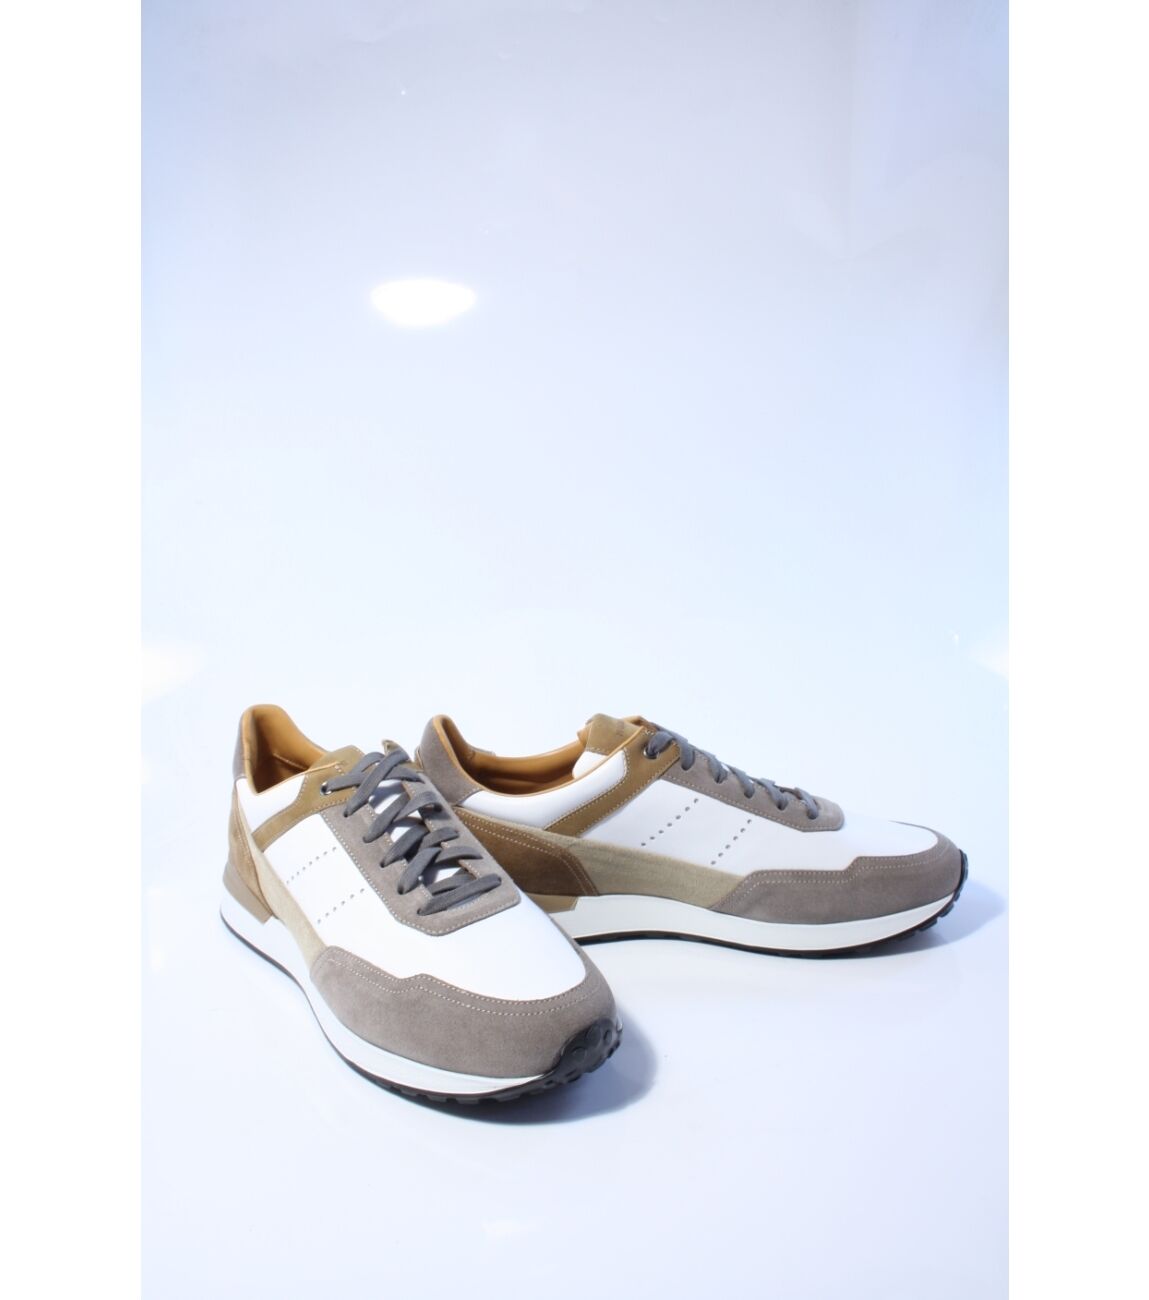 Magnanni Heren sneakers wit 44.5